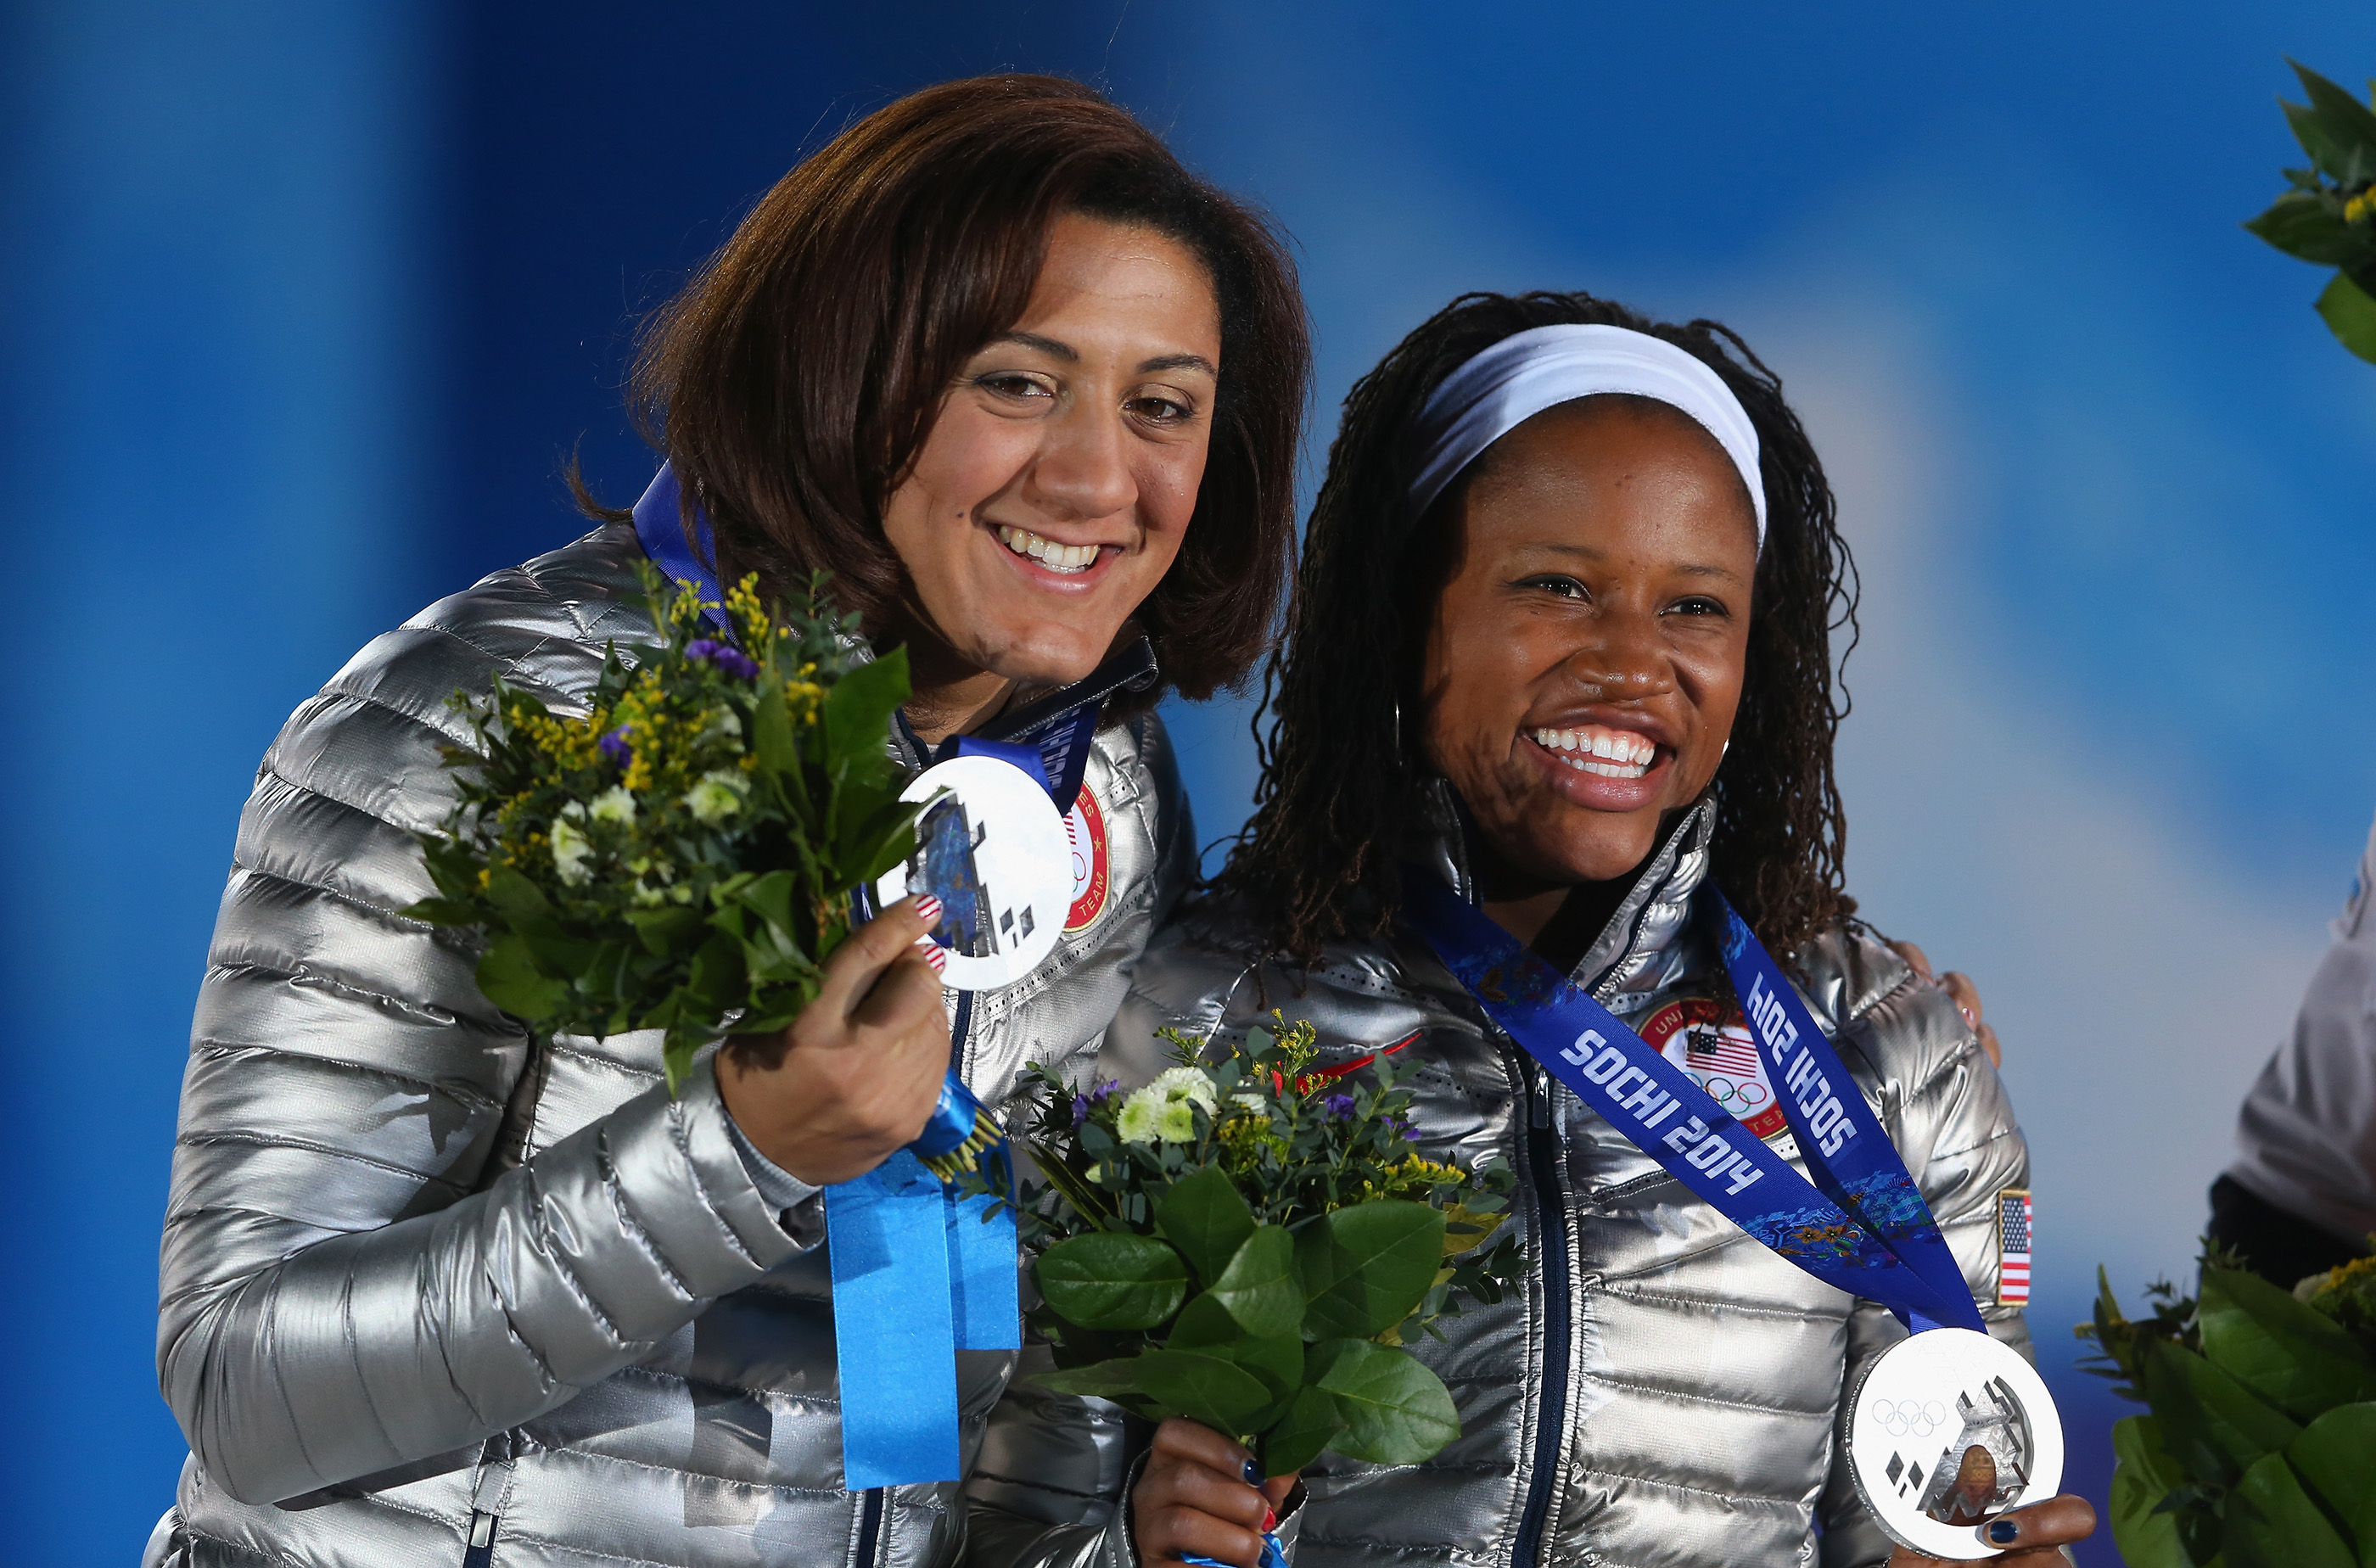 Silver medalists Elana Meyers (L) and Lauryn Williams of the United States team 1 celebrate during the medal ceremony for the Women's Bobsleigh on day thirteen of the Sochi 2014 Winter Olympics at at Medals Plaza on February 20, 2014 in Sochi, Russia.